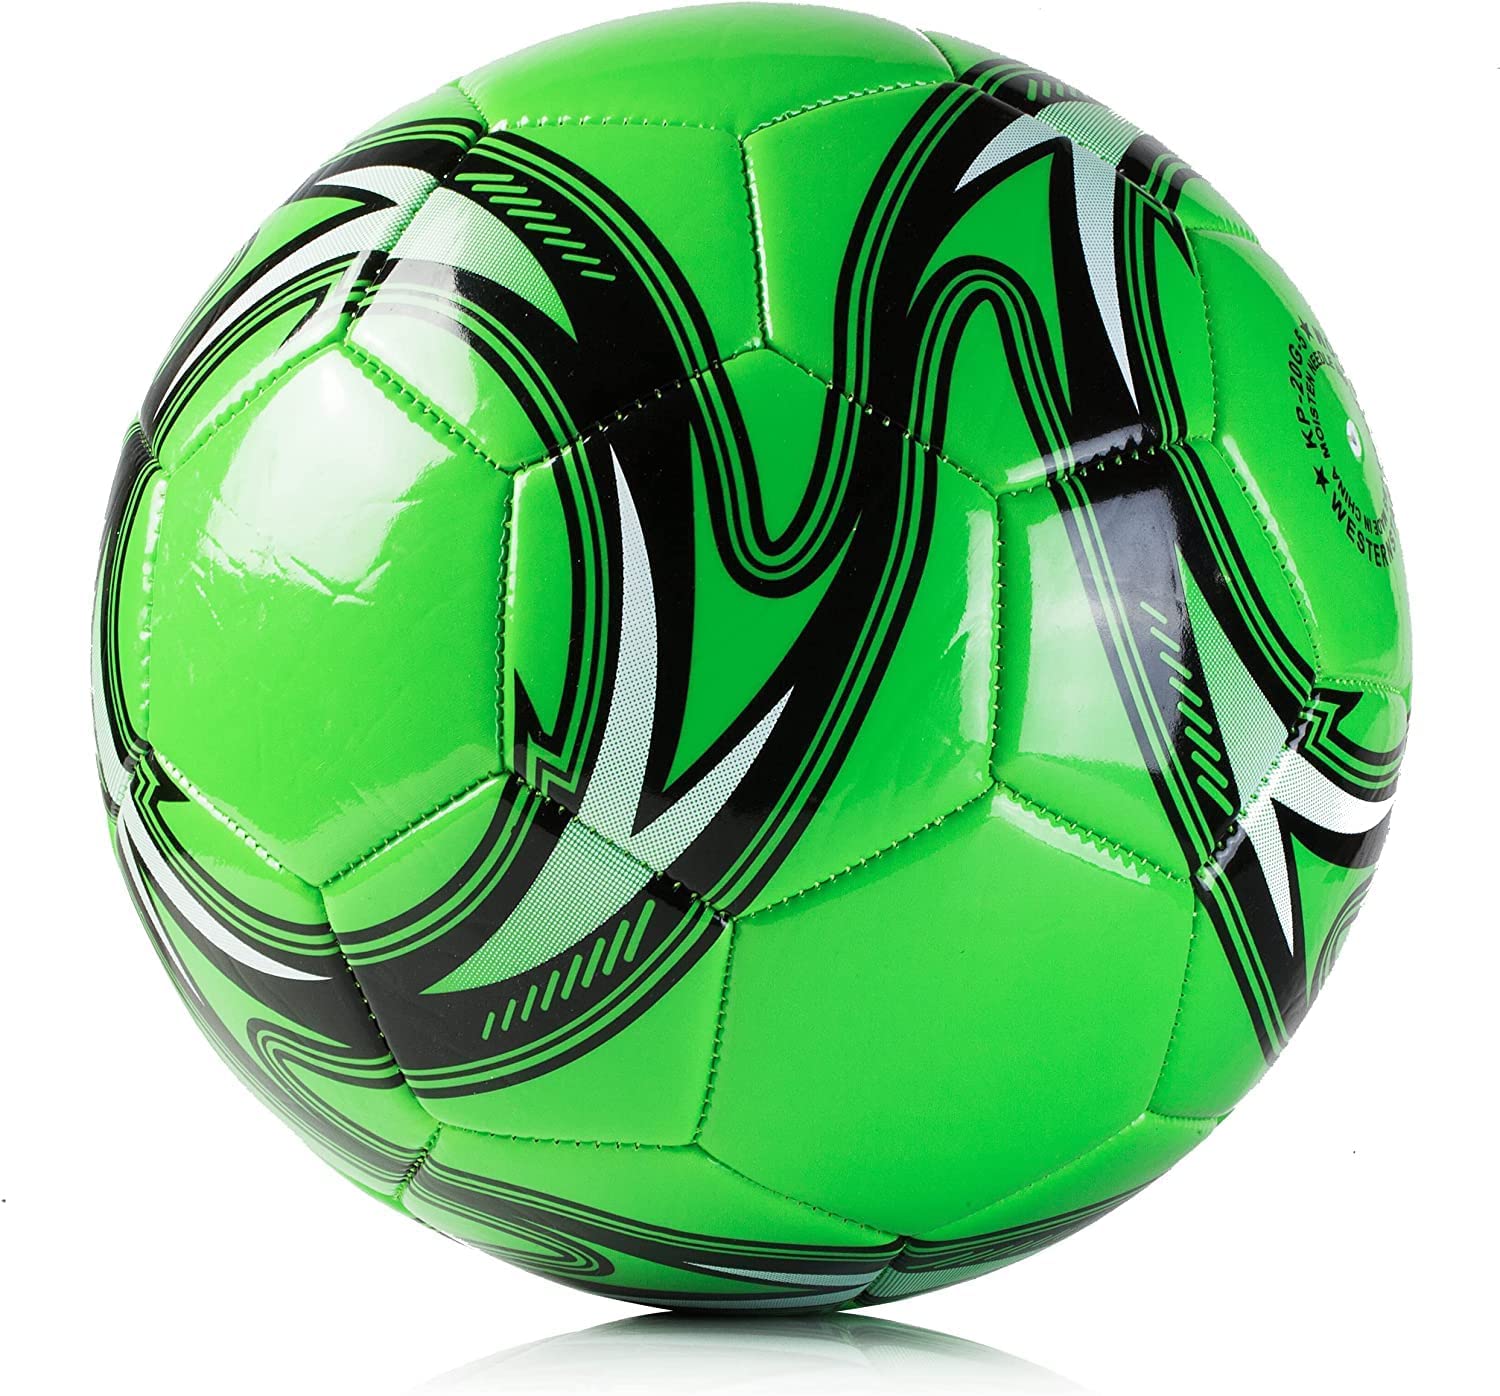 Match and Training Soccer Ball Size 3 4 & Size 5 - Official Match Weight - 5 Colors